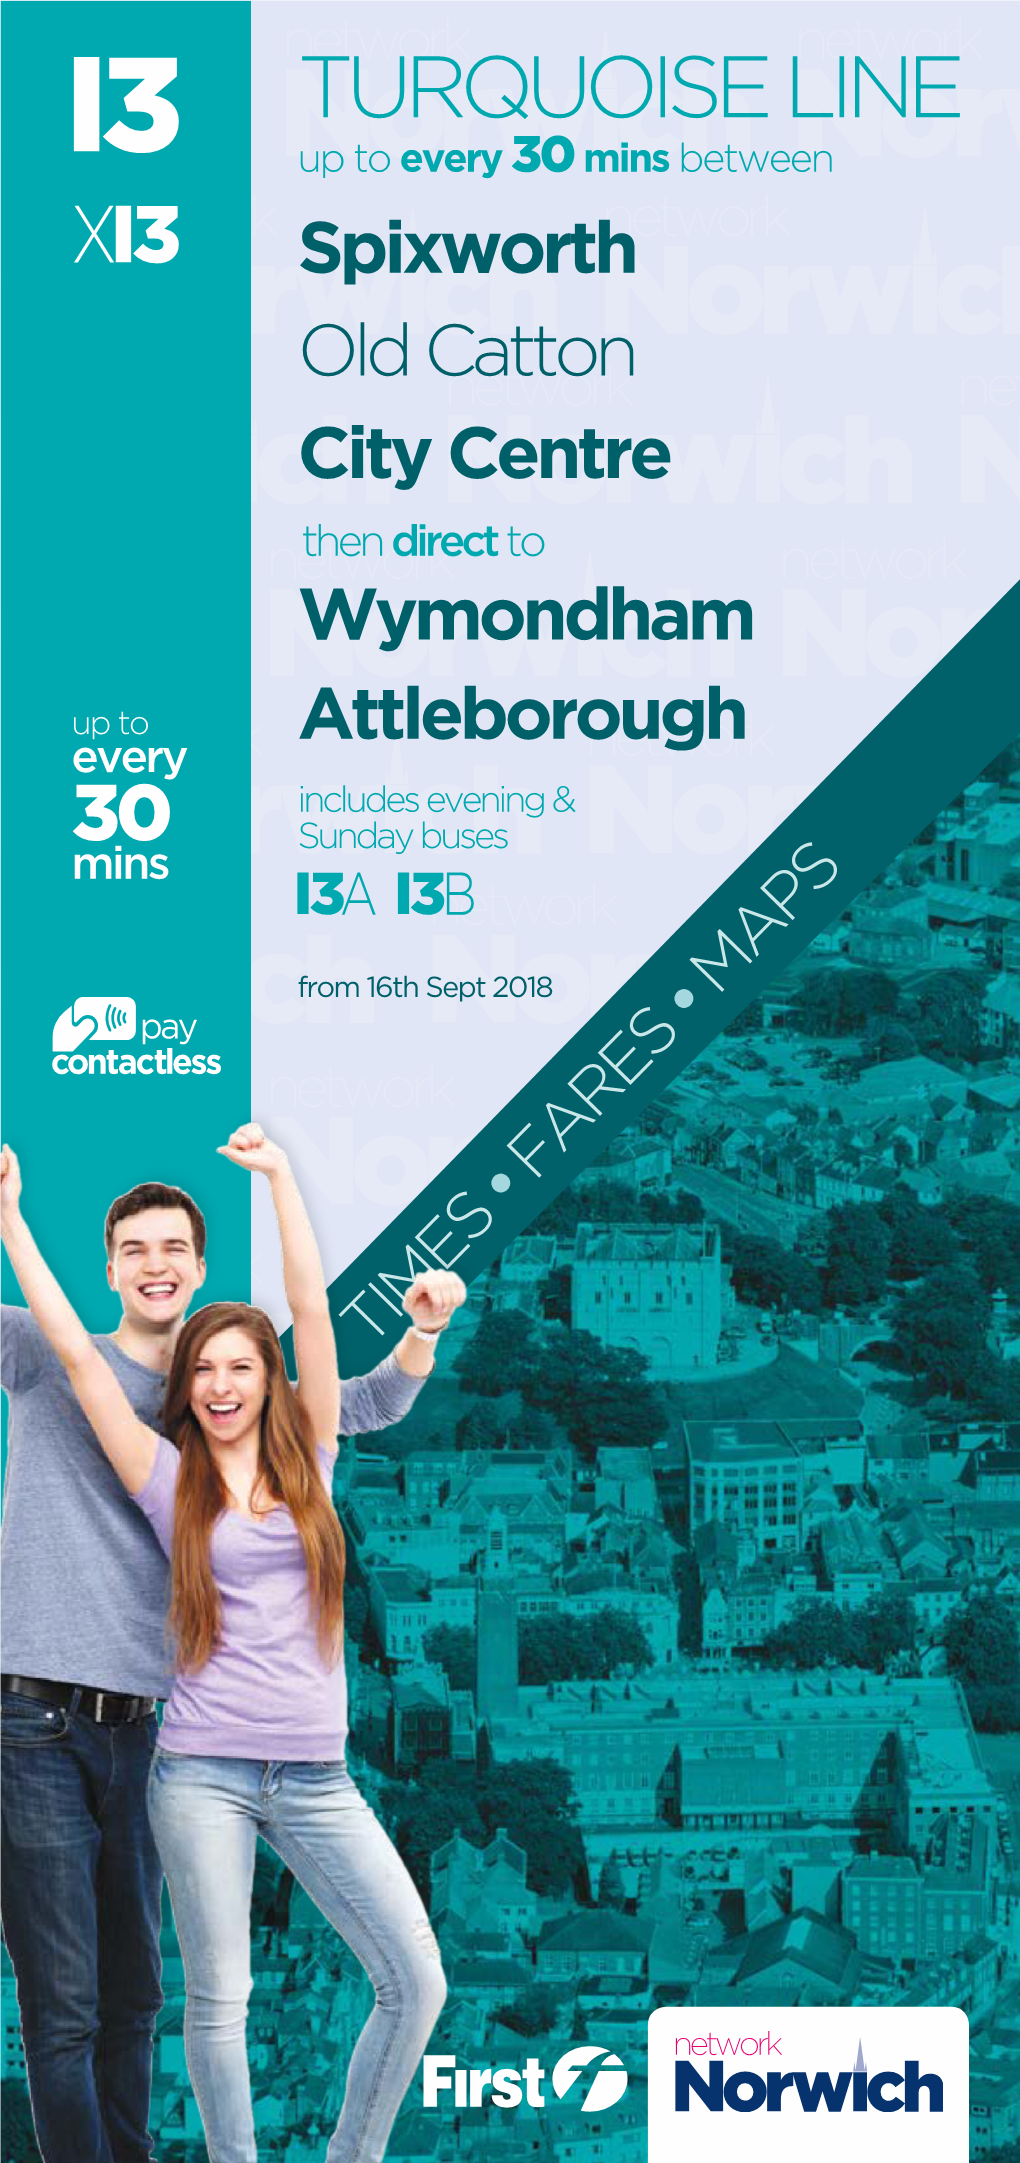 TURQUOISE LINE up to Every 30 Mins Between Spixworth Old Catton City Centre Then Direct to Wymondham up to Attleborough Every Includes Evening & 30 Sunday Buses Mins